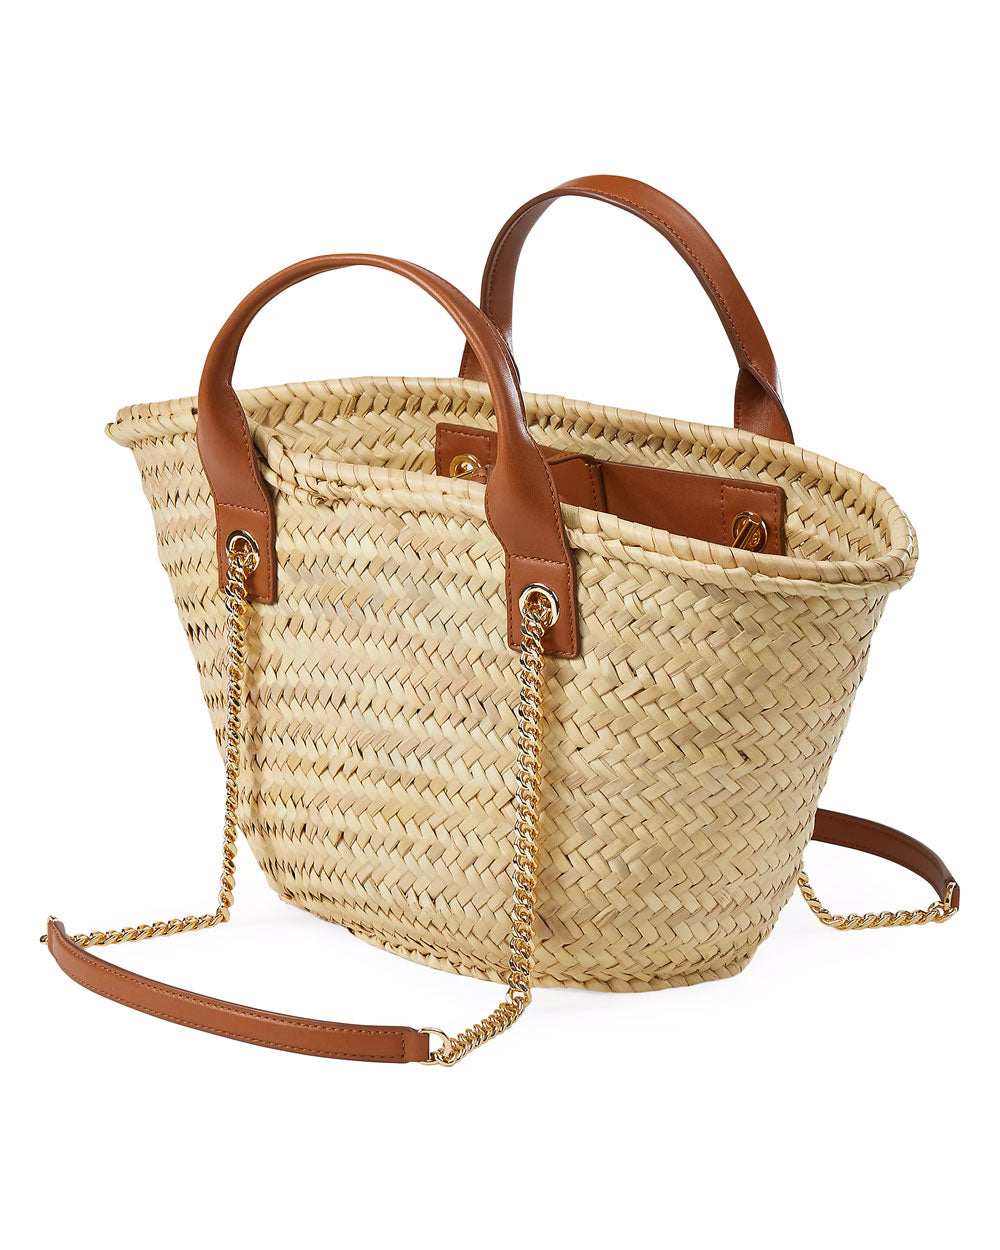 Straw Crest Patch Tote in Hazelwood